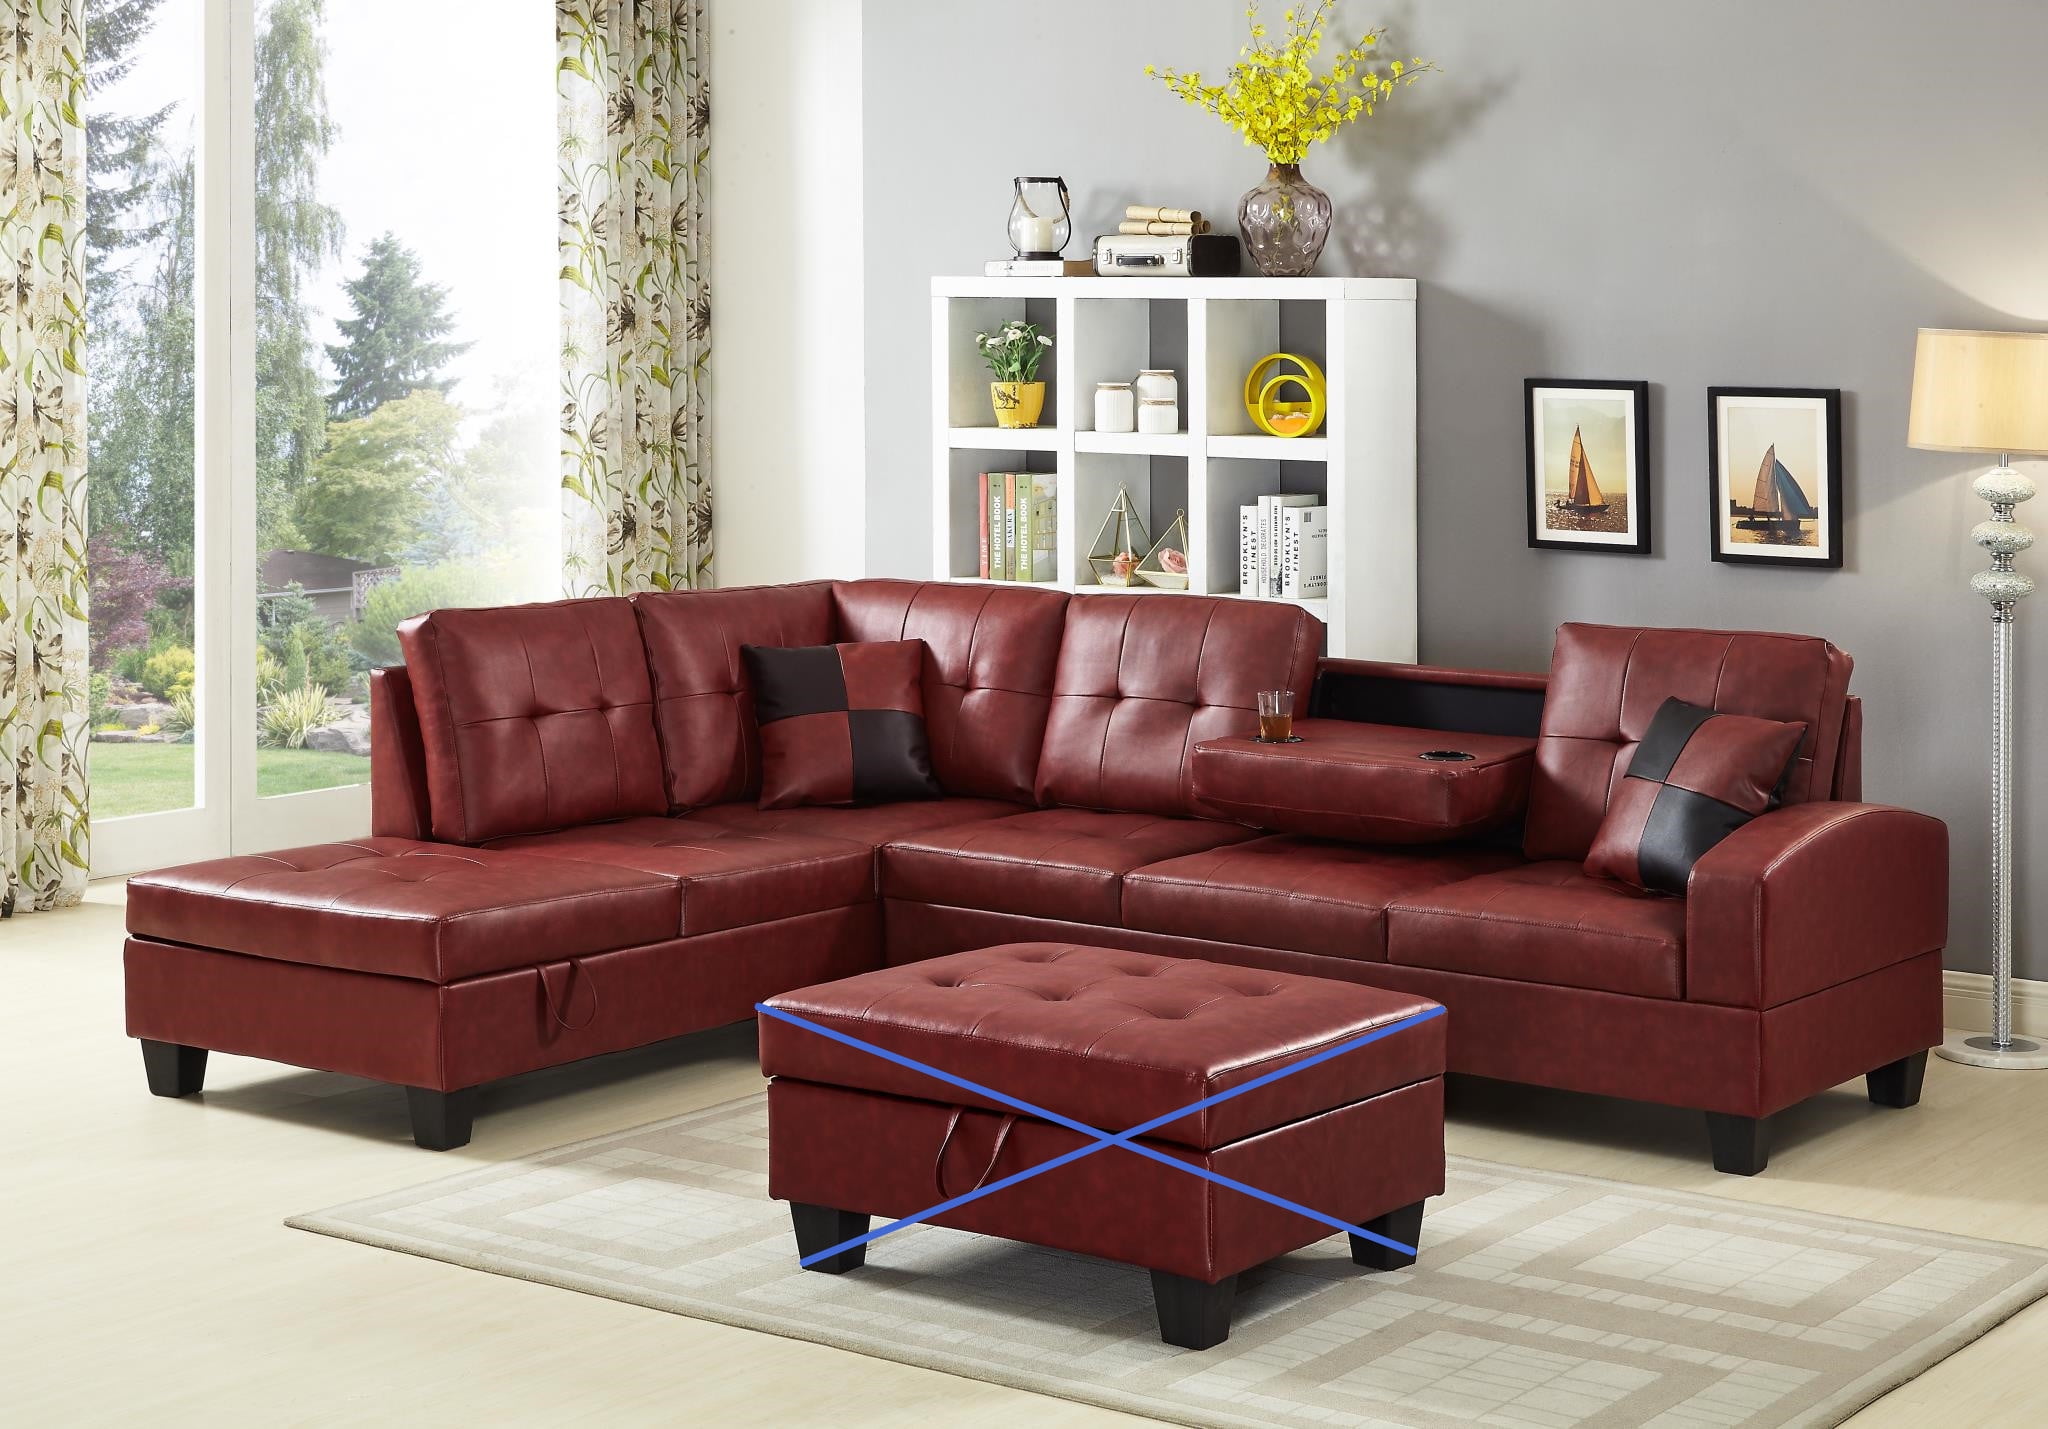 GTU Furniture Pu Leather Living Room Irreversible Living Room Sectional